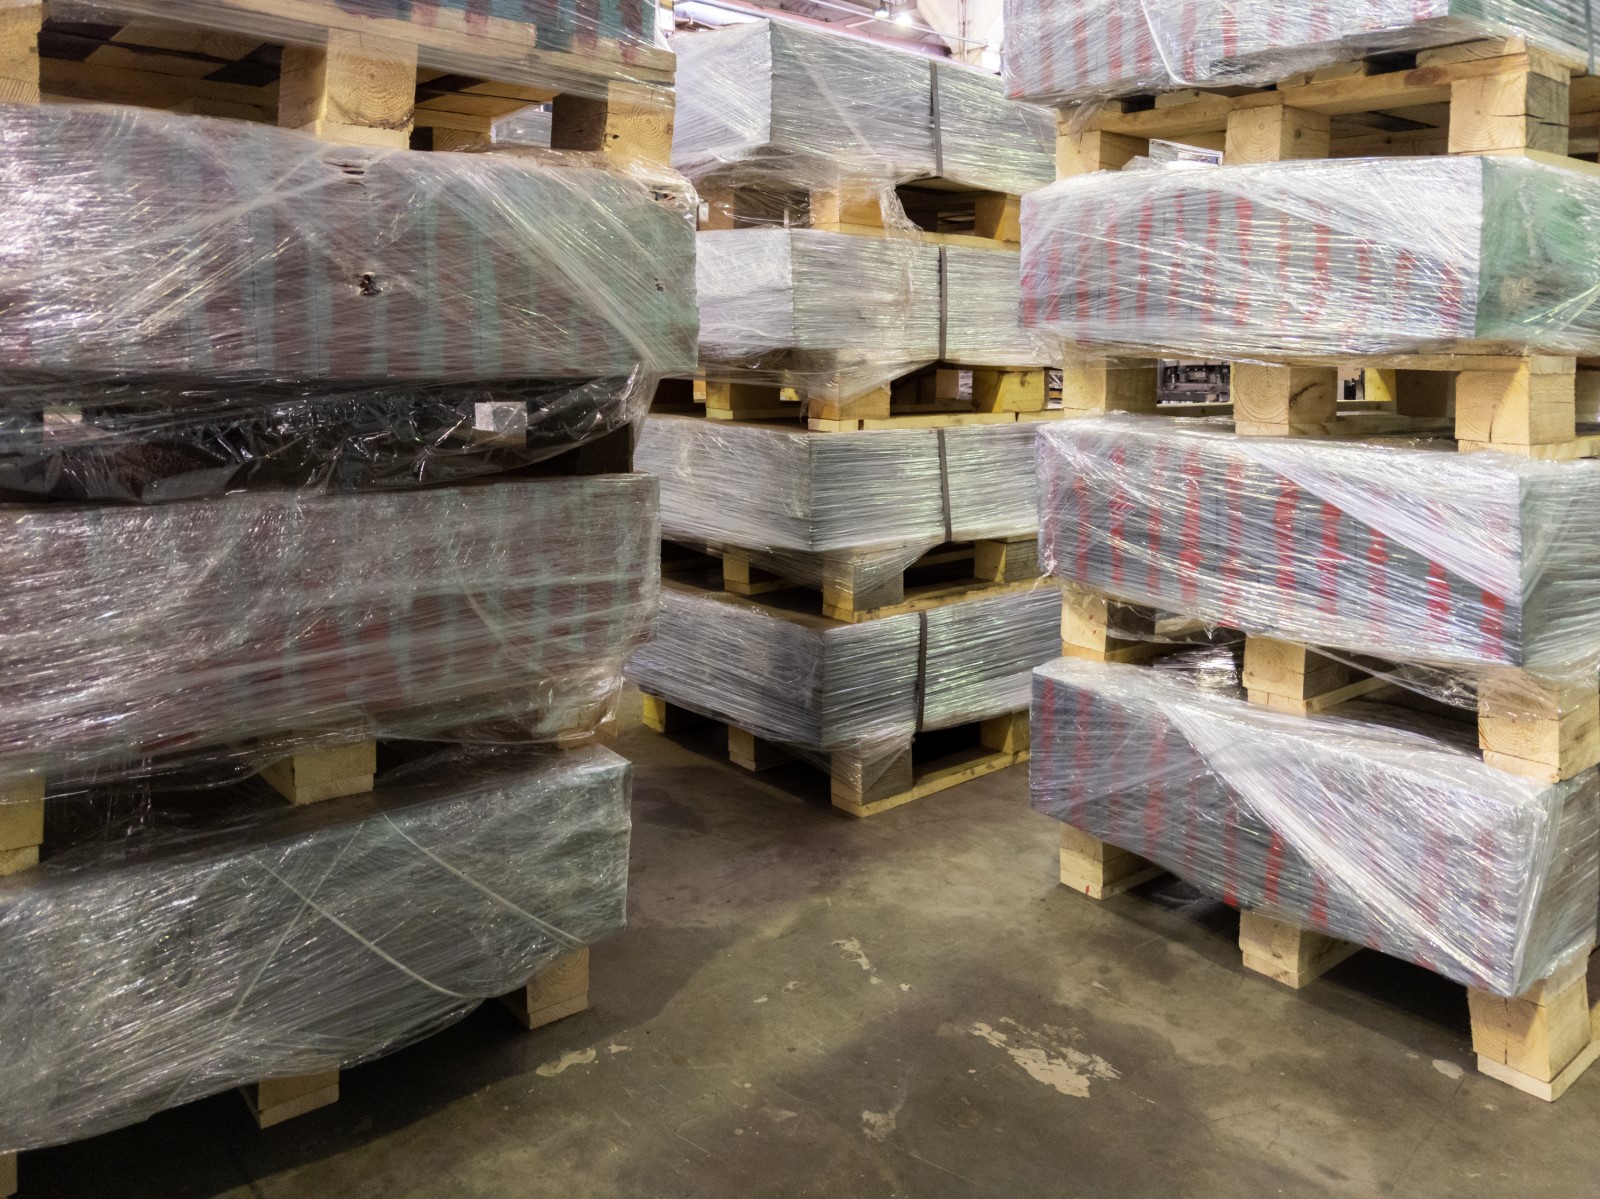 stretch wrapping doors and windows with a pallet wrapper offers cost savings